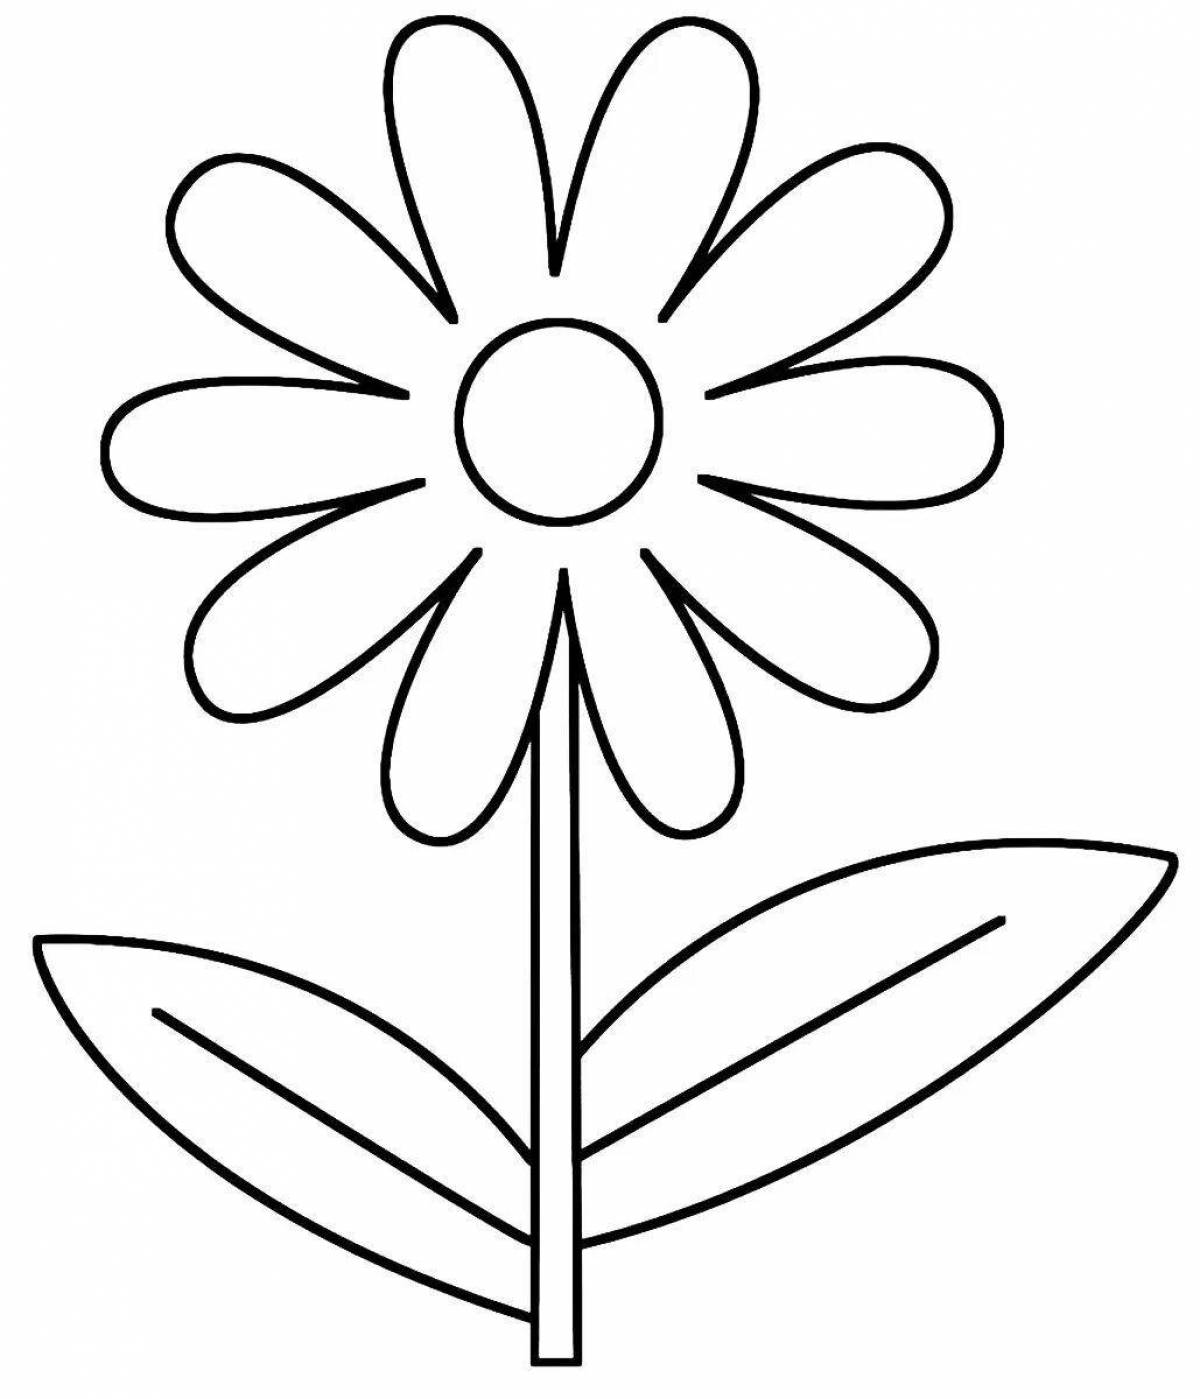 Lovely daisies coloring page for preschoolers